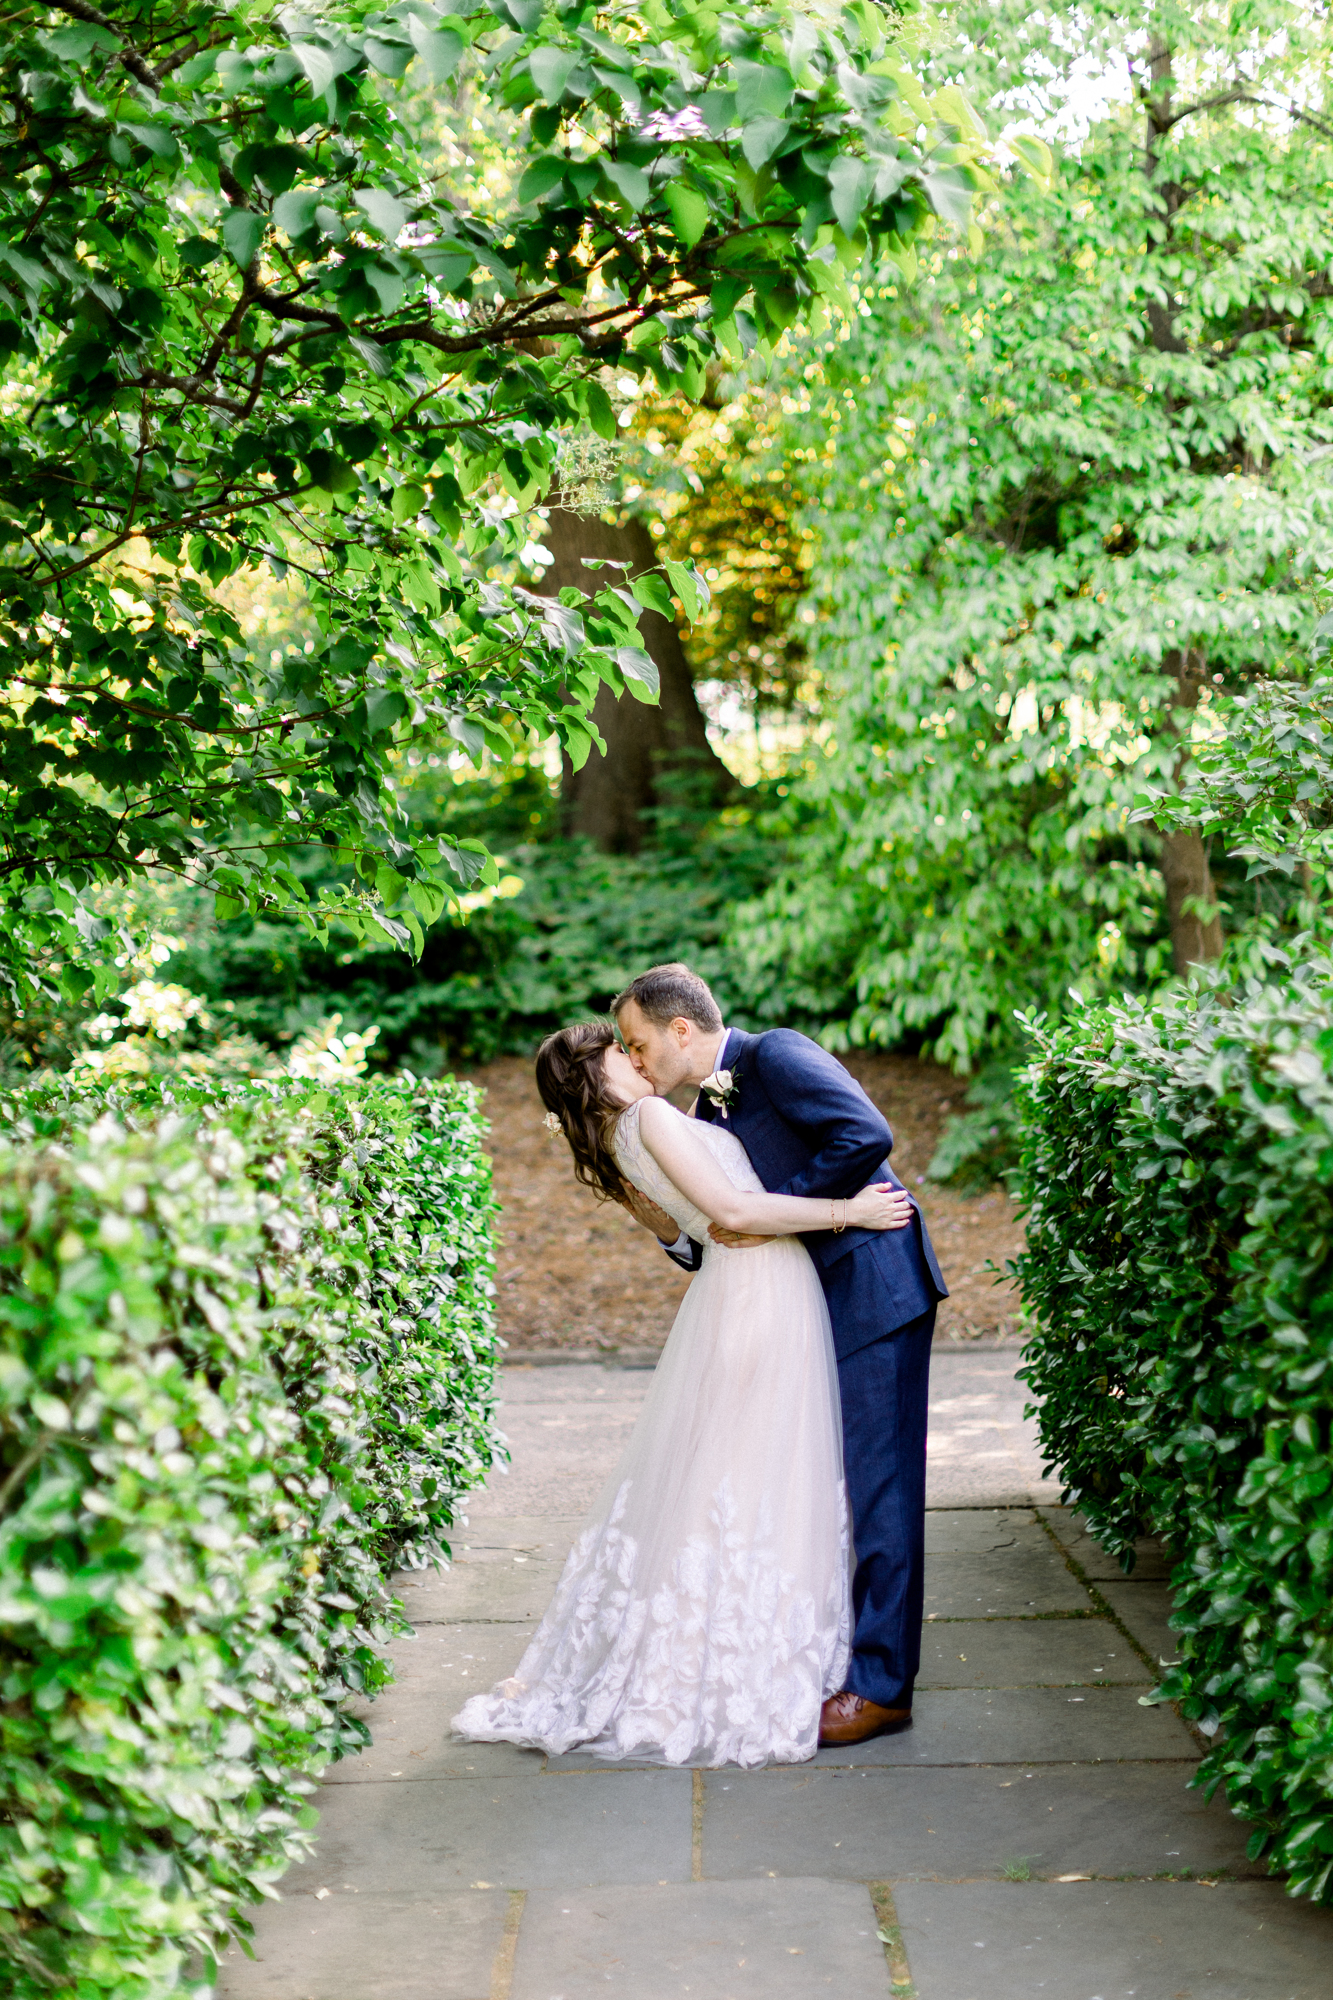 Sweet Summer Wedding Photos at the Conservatory Garden in Central Park New York